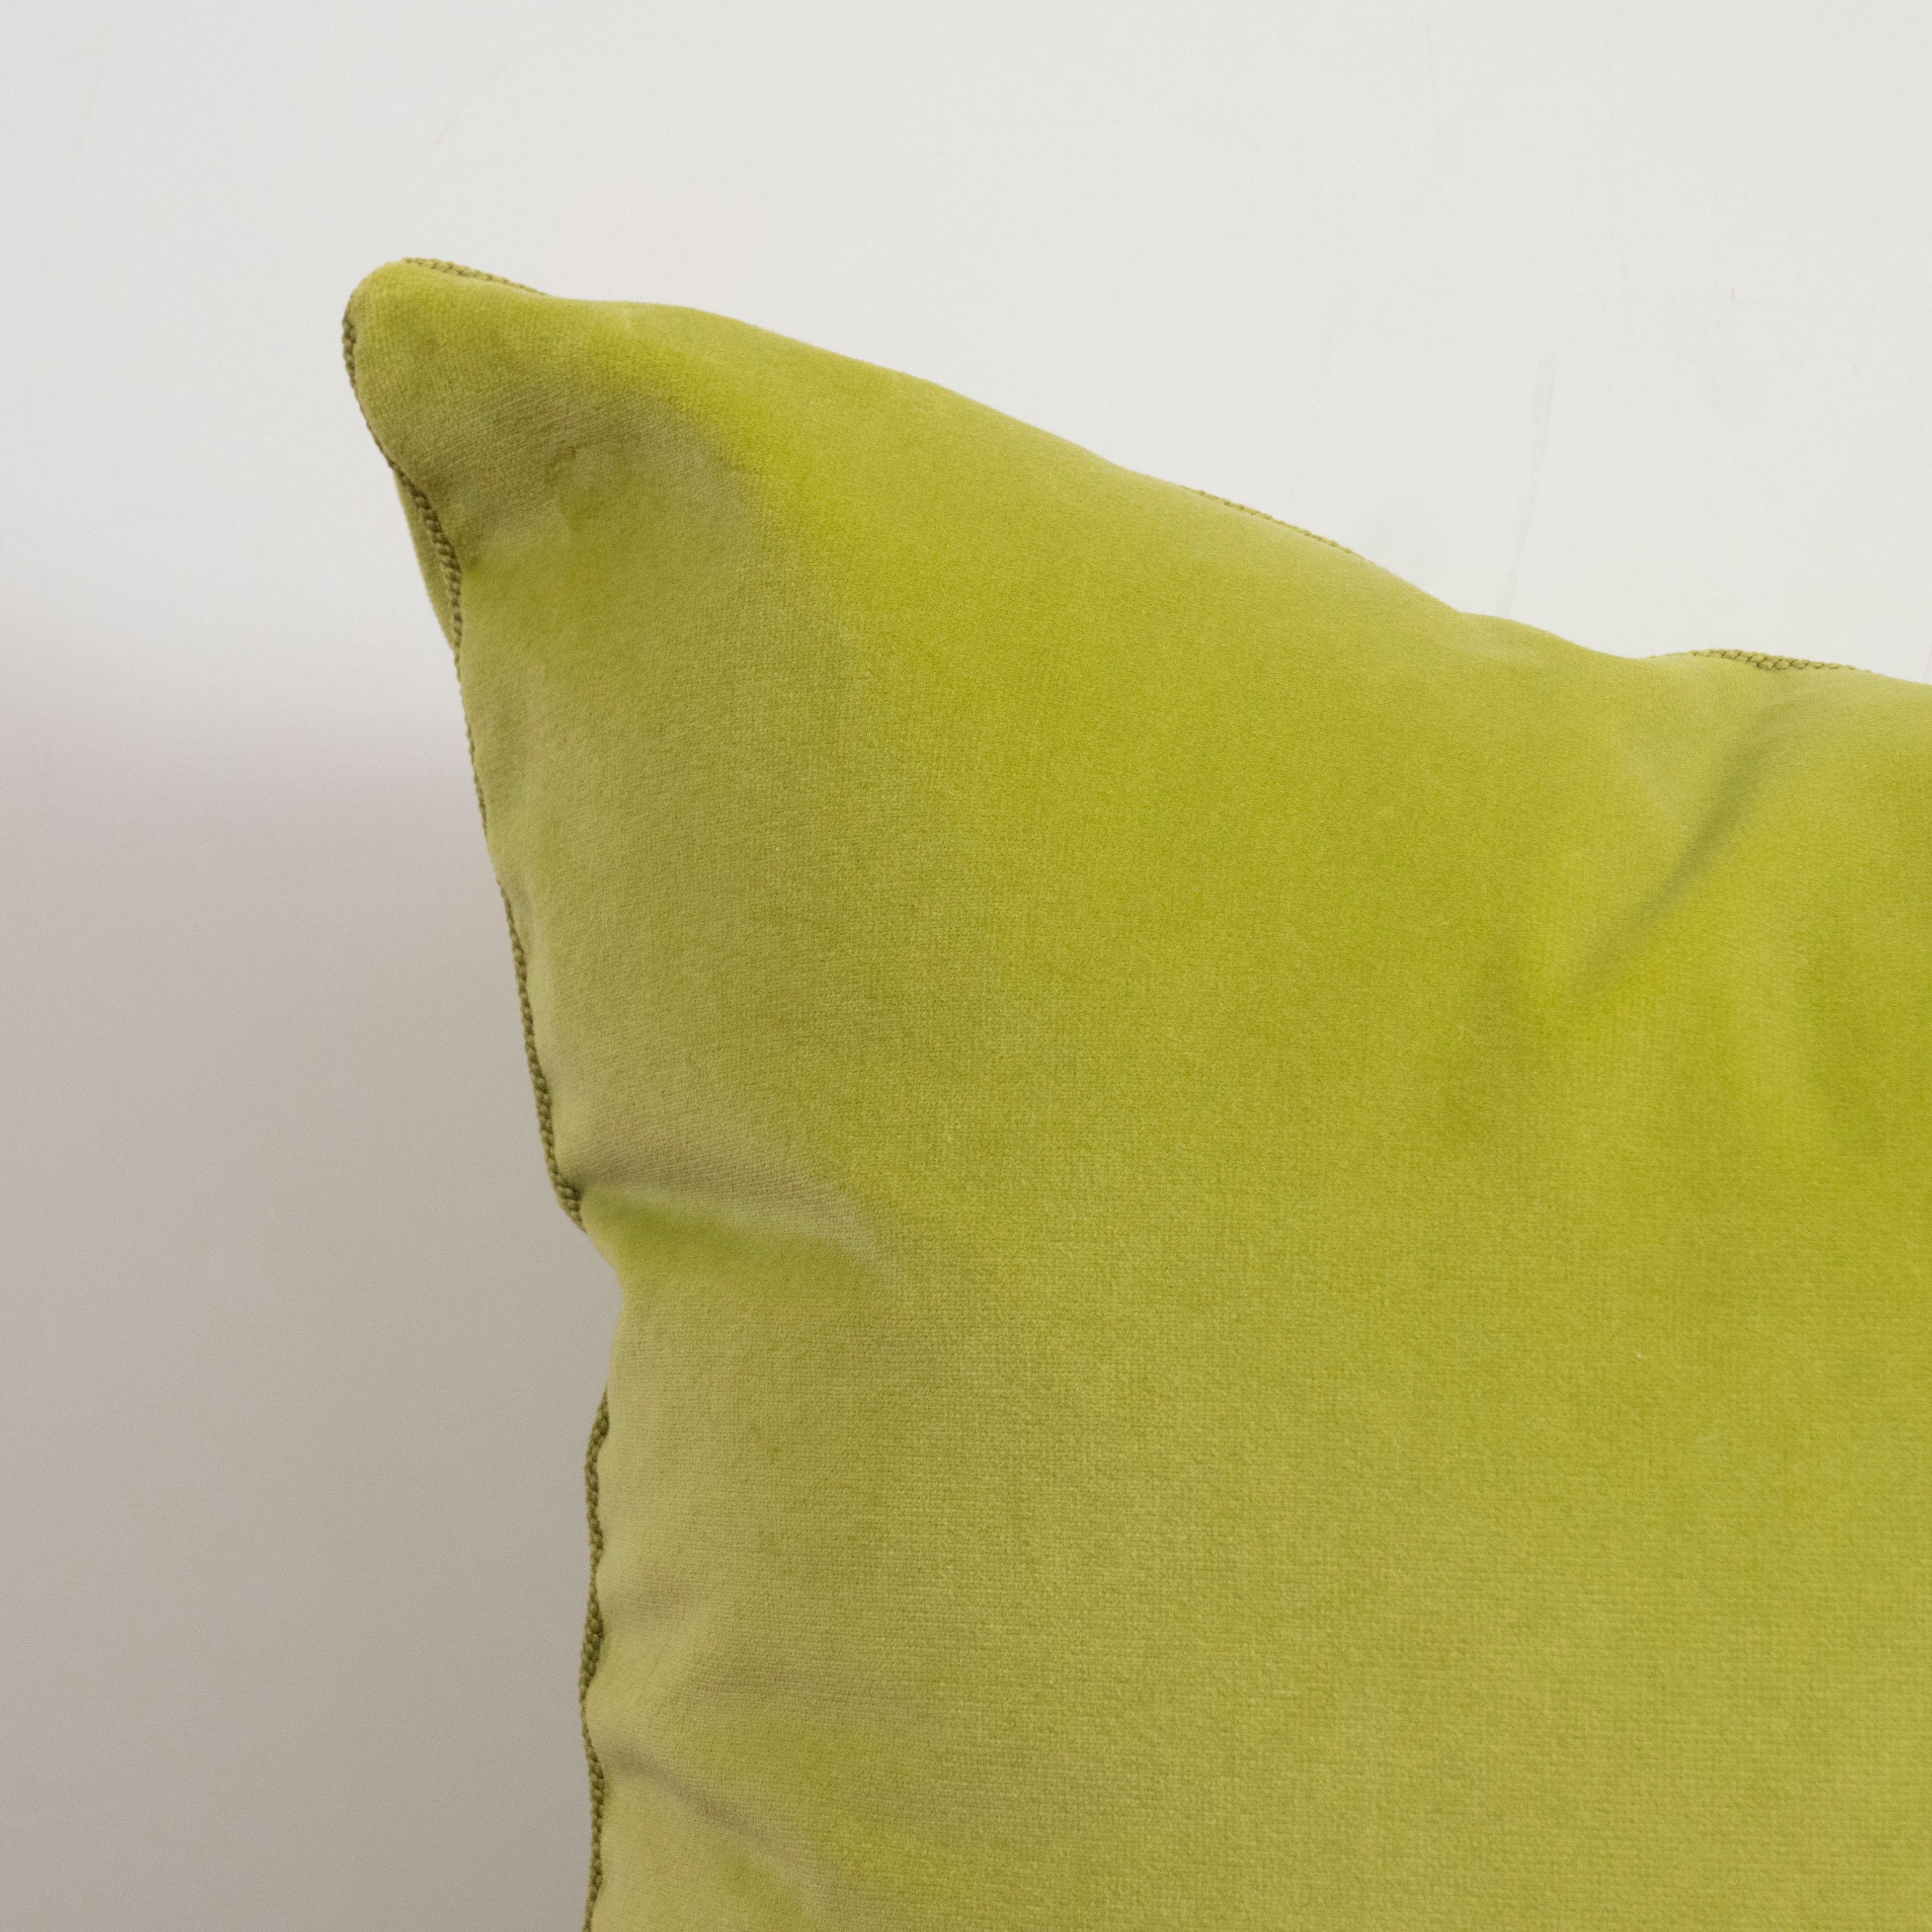 A pair of knife-edged square pillows in a fabulous acid green velvet.